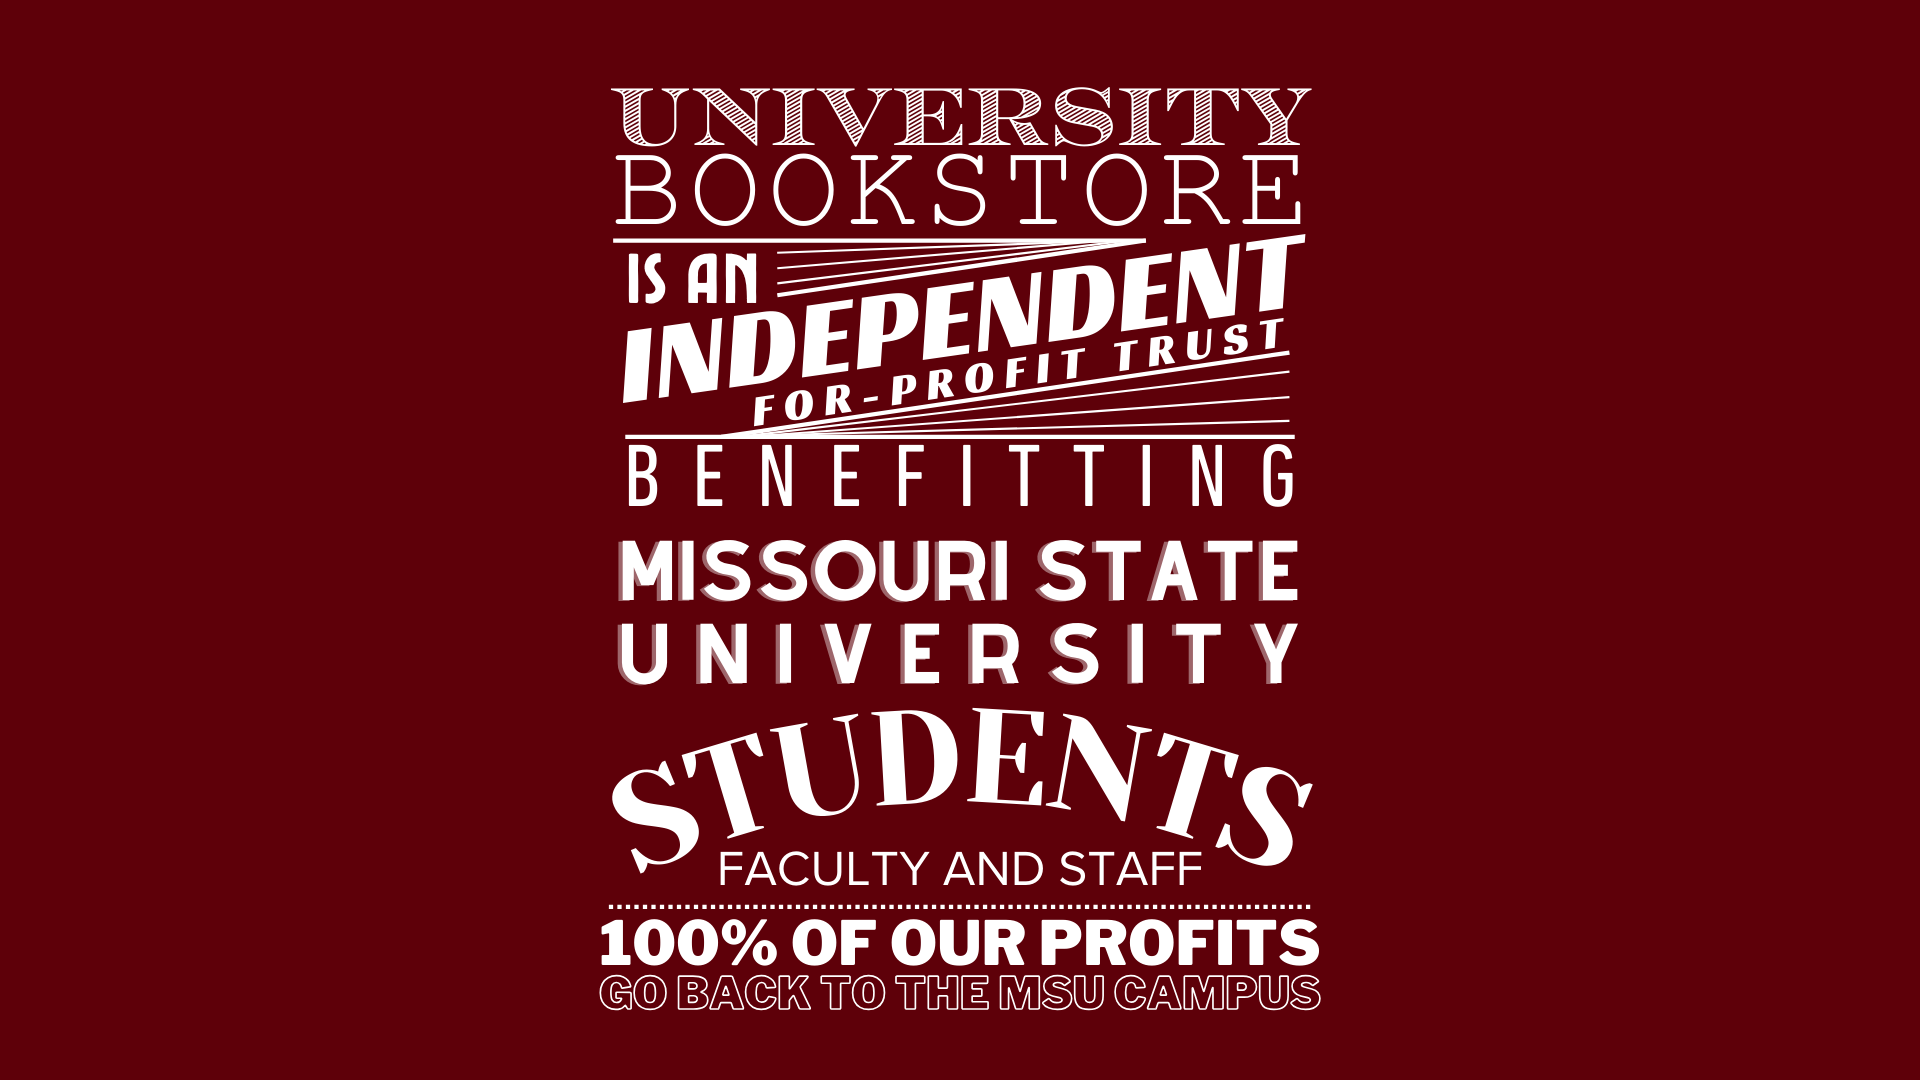 UNIVERSITY BOOKSTORE IS AN INDEPENDENT FOR-PROFIT TRUST BENEFITTING MISSOURI STATE UNIVERSITY STUDENTS FACULTY AND STAFF 100% OF OUR PROFITS GO BACK TO THE MSU CAMPUS.